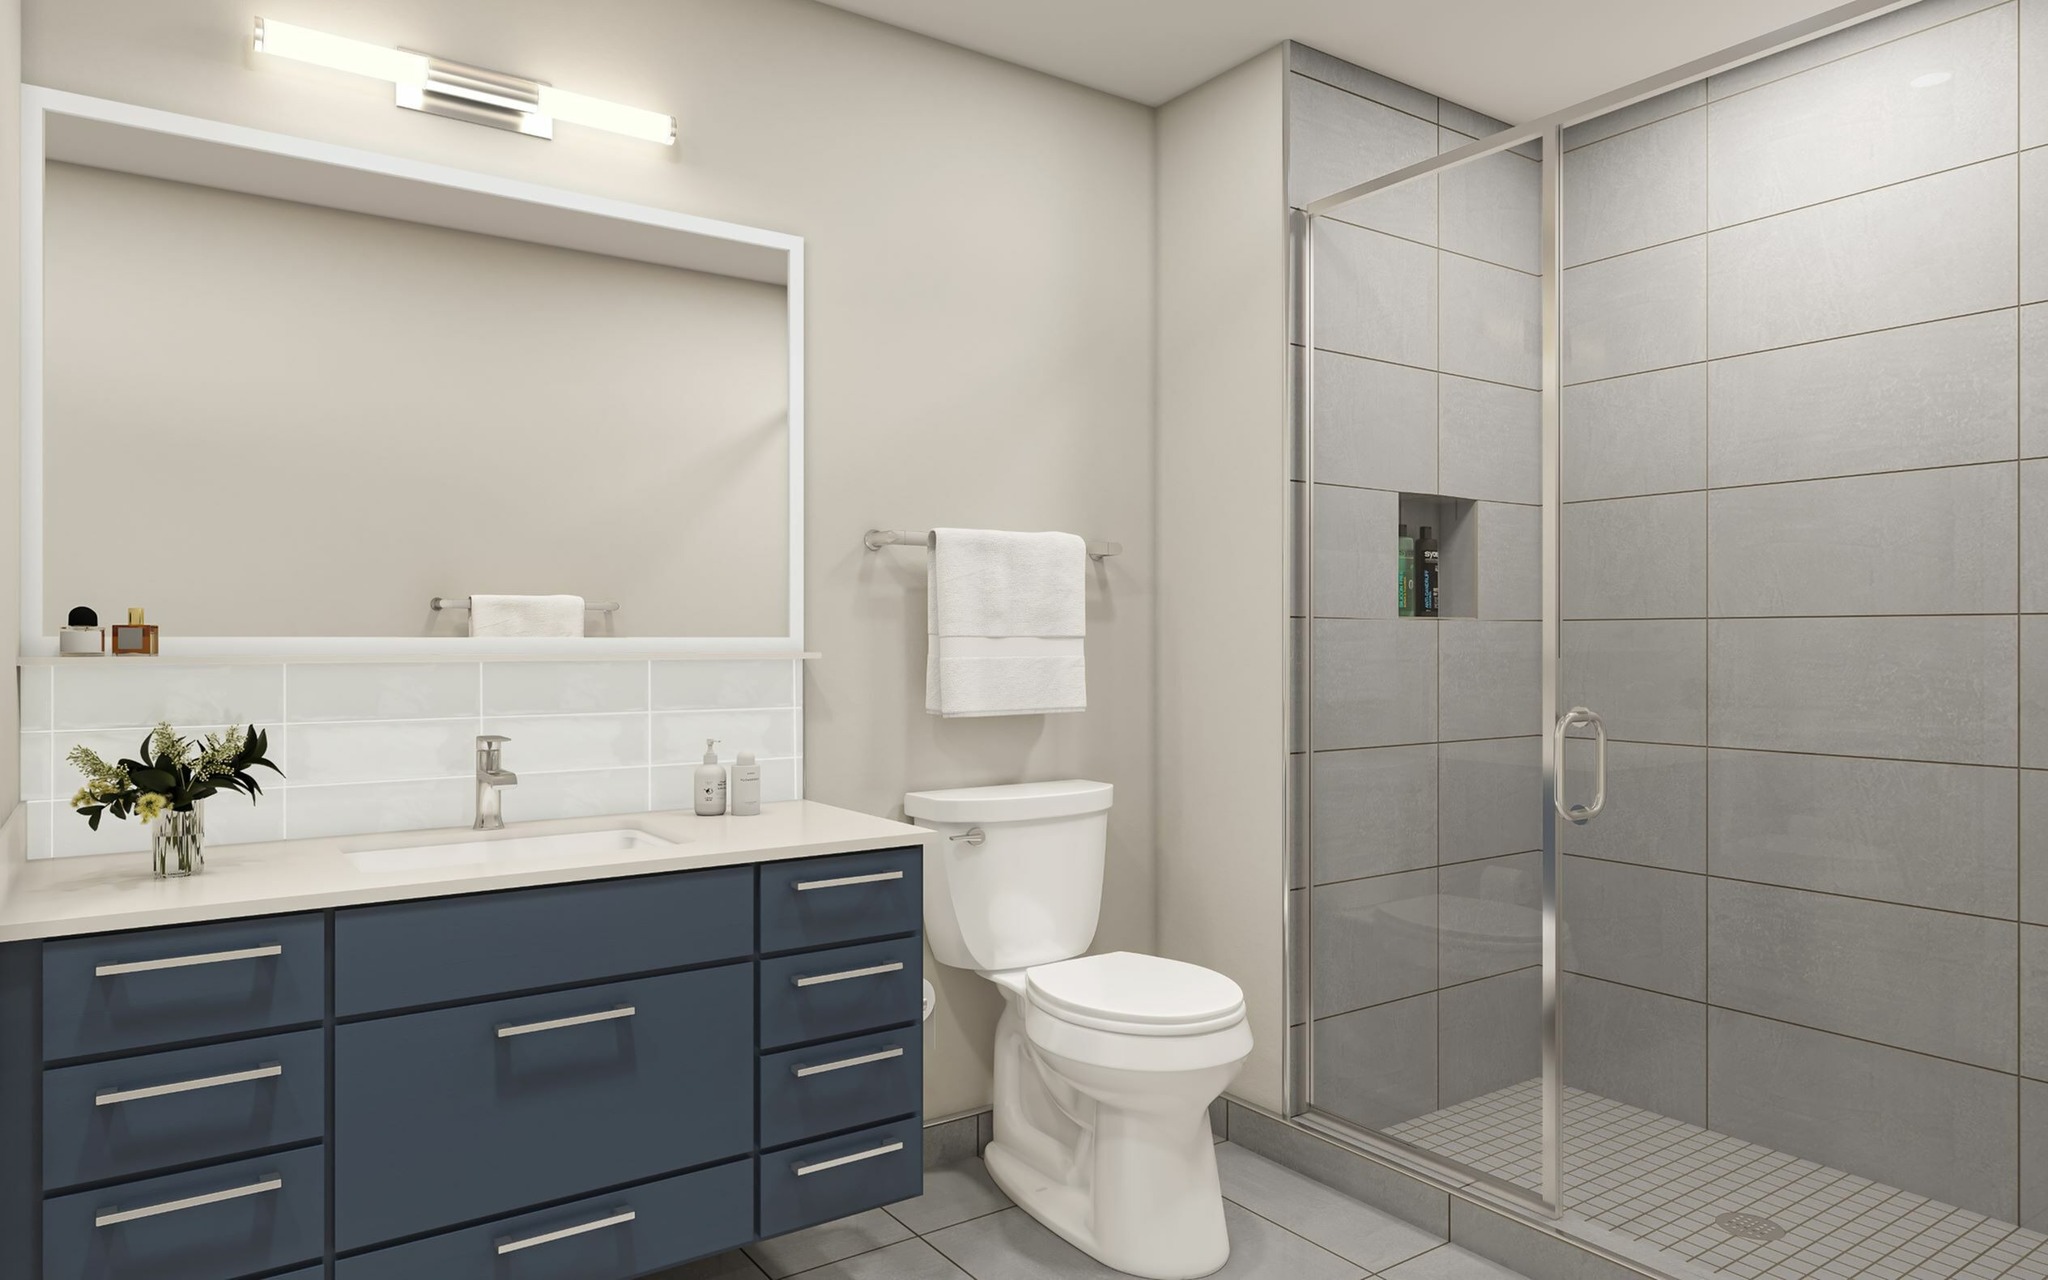 Ceramic-Tiled Bathrooms With Large Vanities & Mirrors; Select With Oversized Showers | Meridian 2250 at Eisenhower Station | Luxury Alexandria VA Apartments